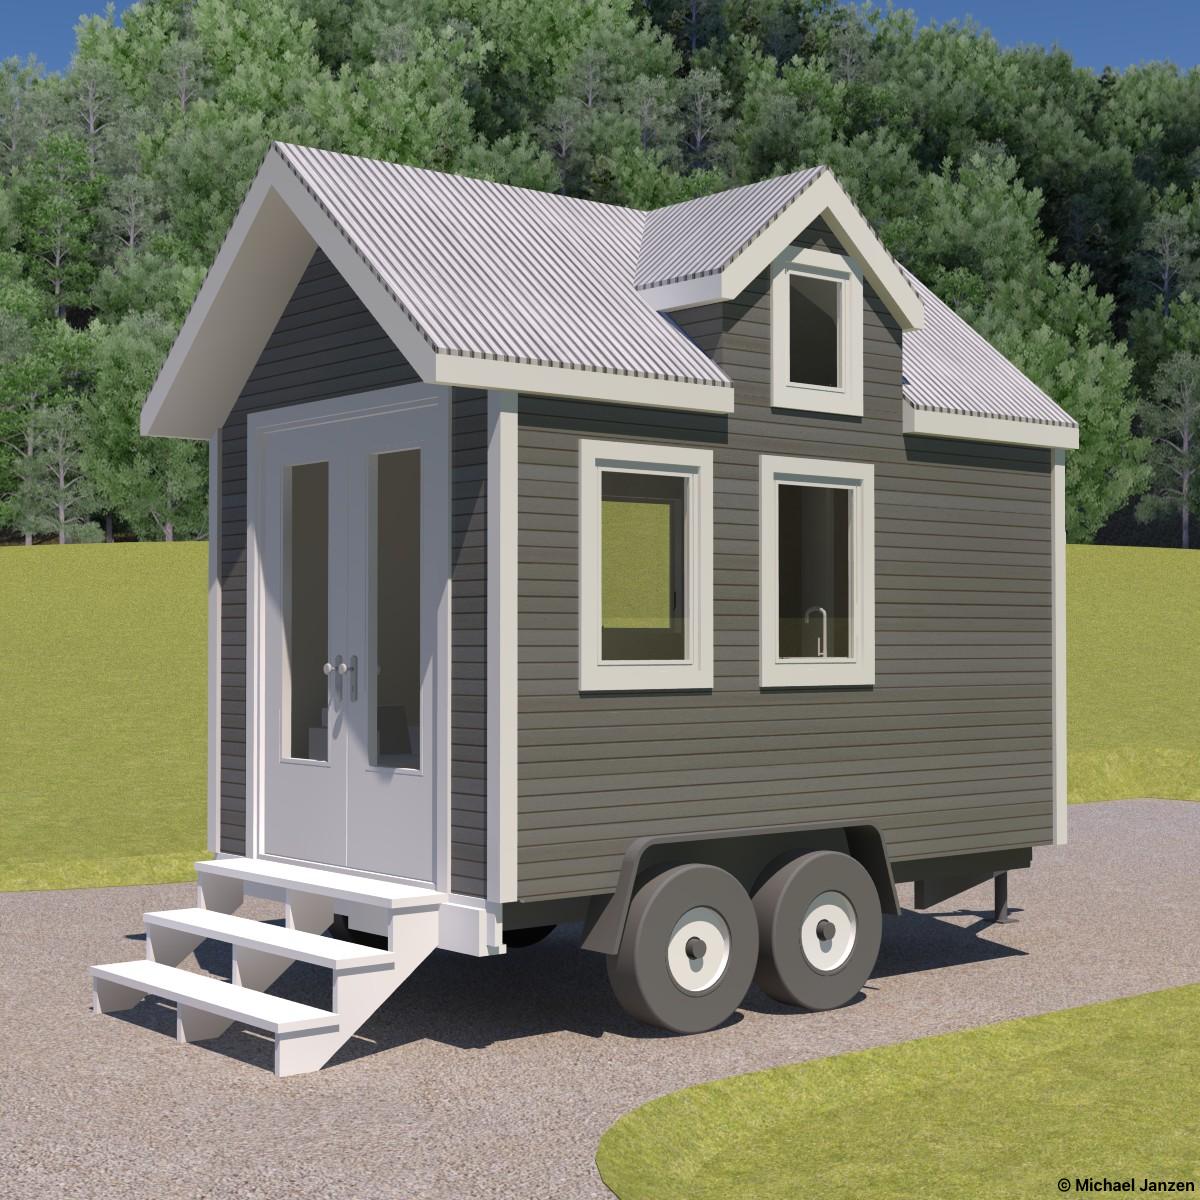 Tiny House with Dormers Design Study